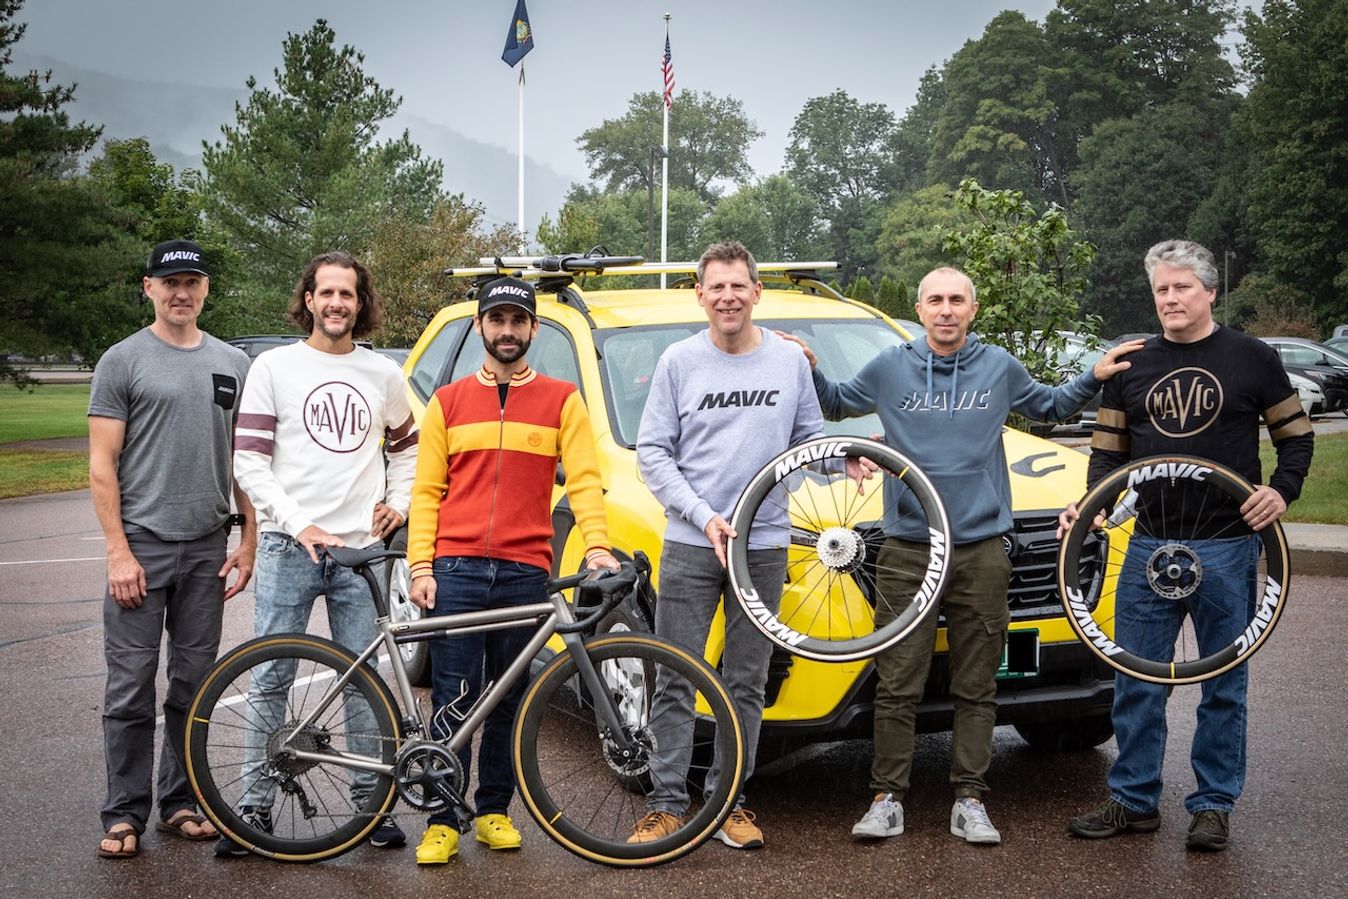 Mavic have chosen the cycling rich community of Waterbury, VT to base themselves 